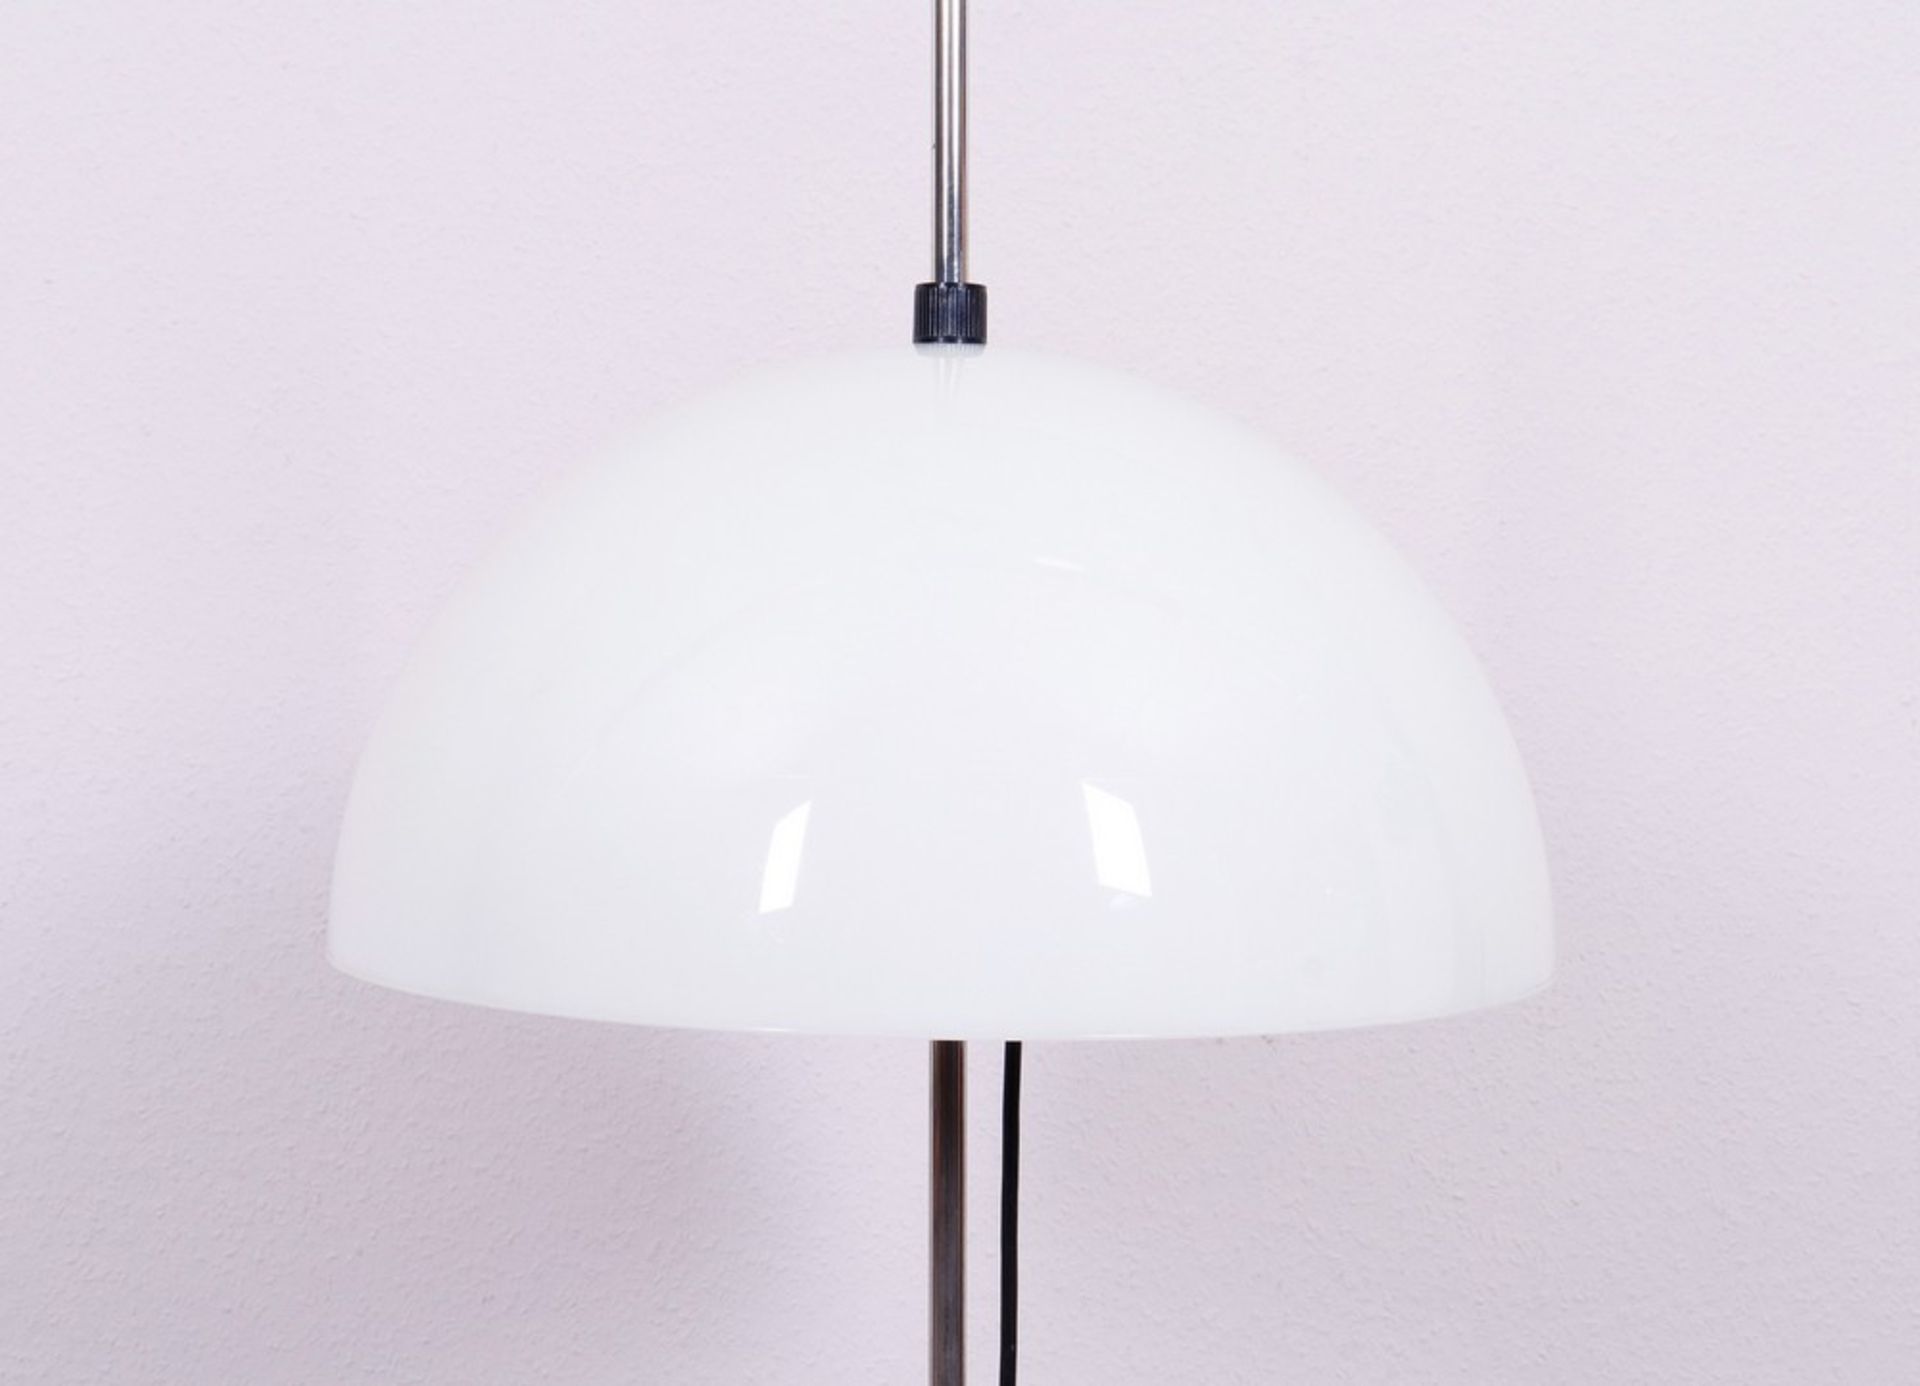 Floor lamp, probably Italy, 1970s - Image 3 of 3